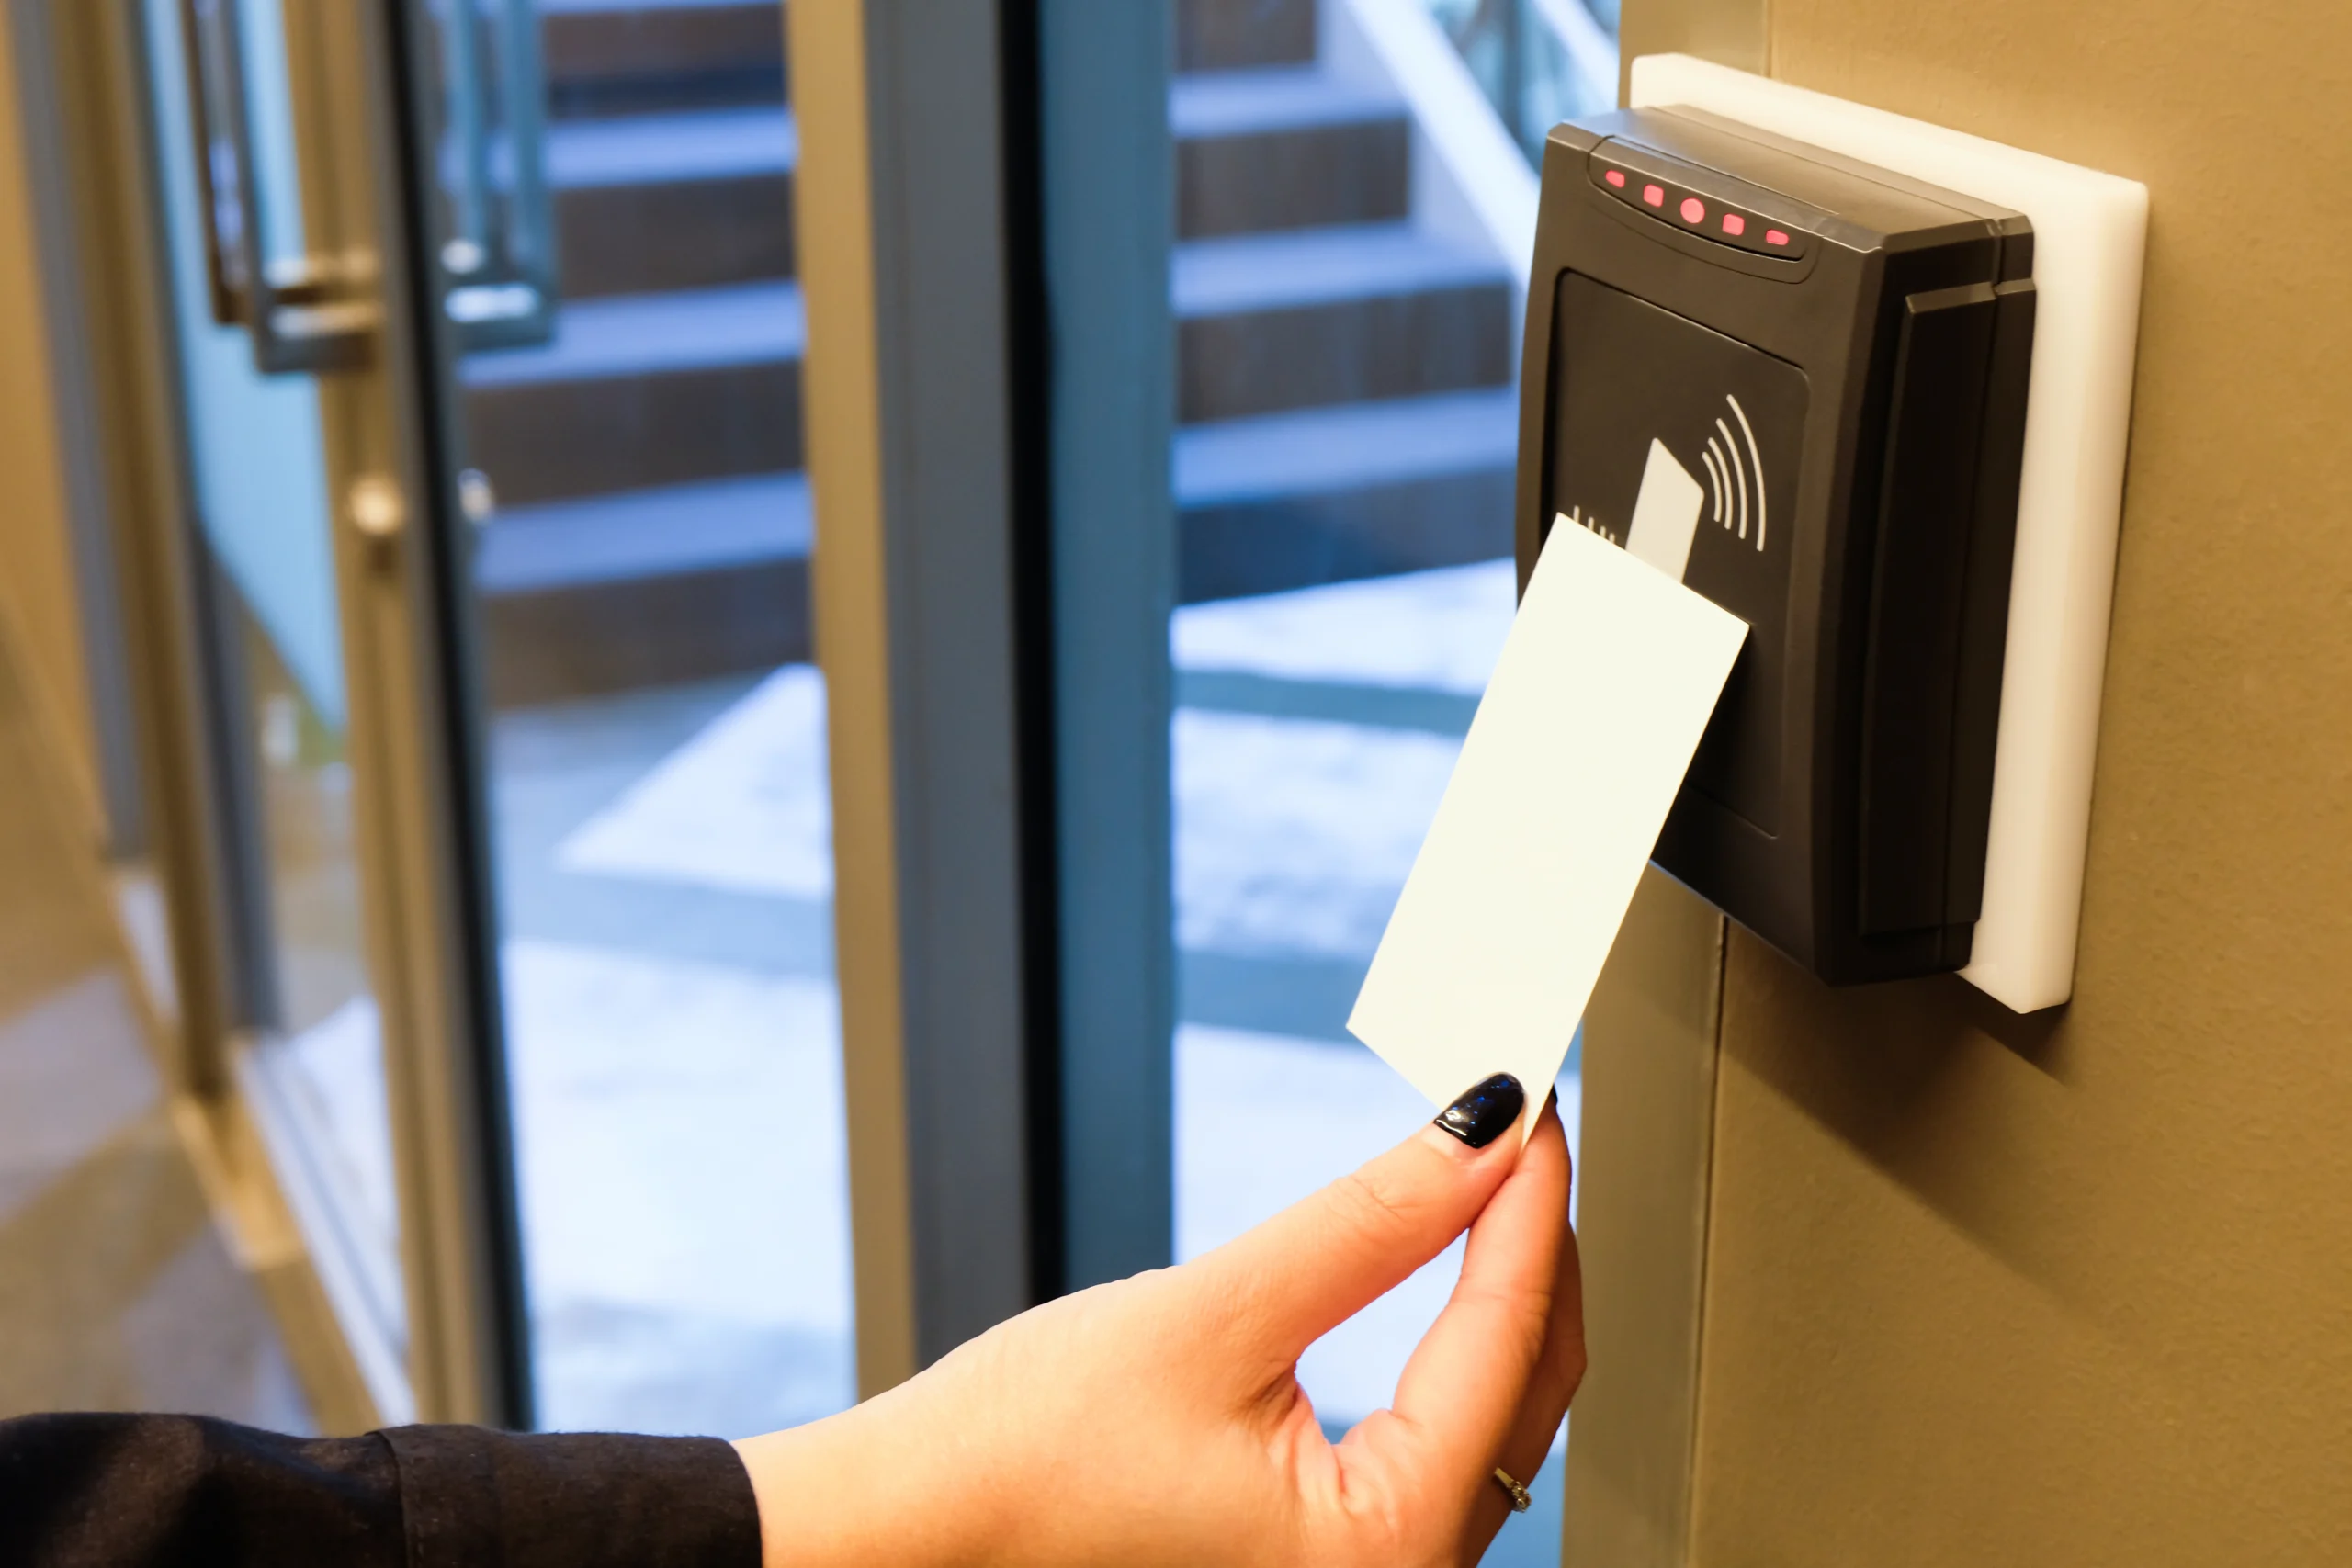 Access control system to enter the building using a card on the card reader